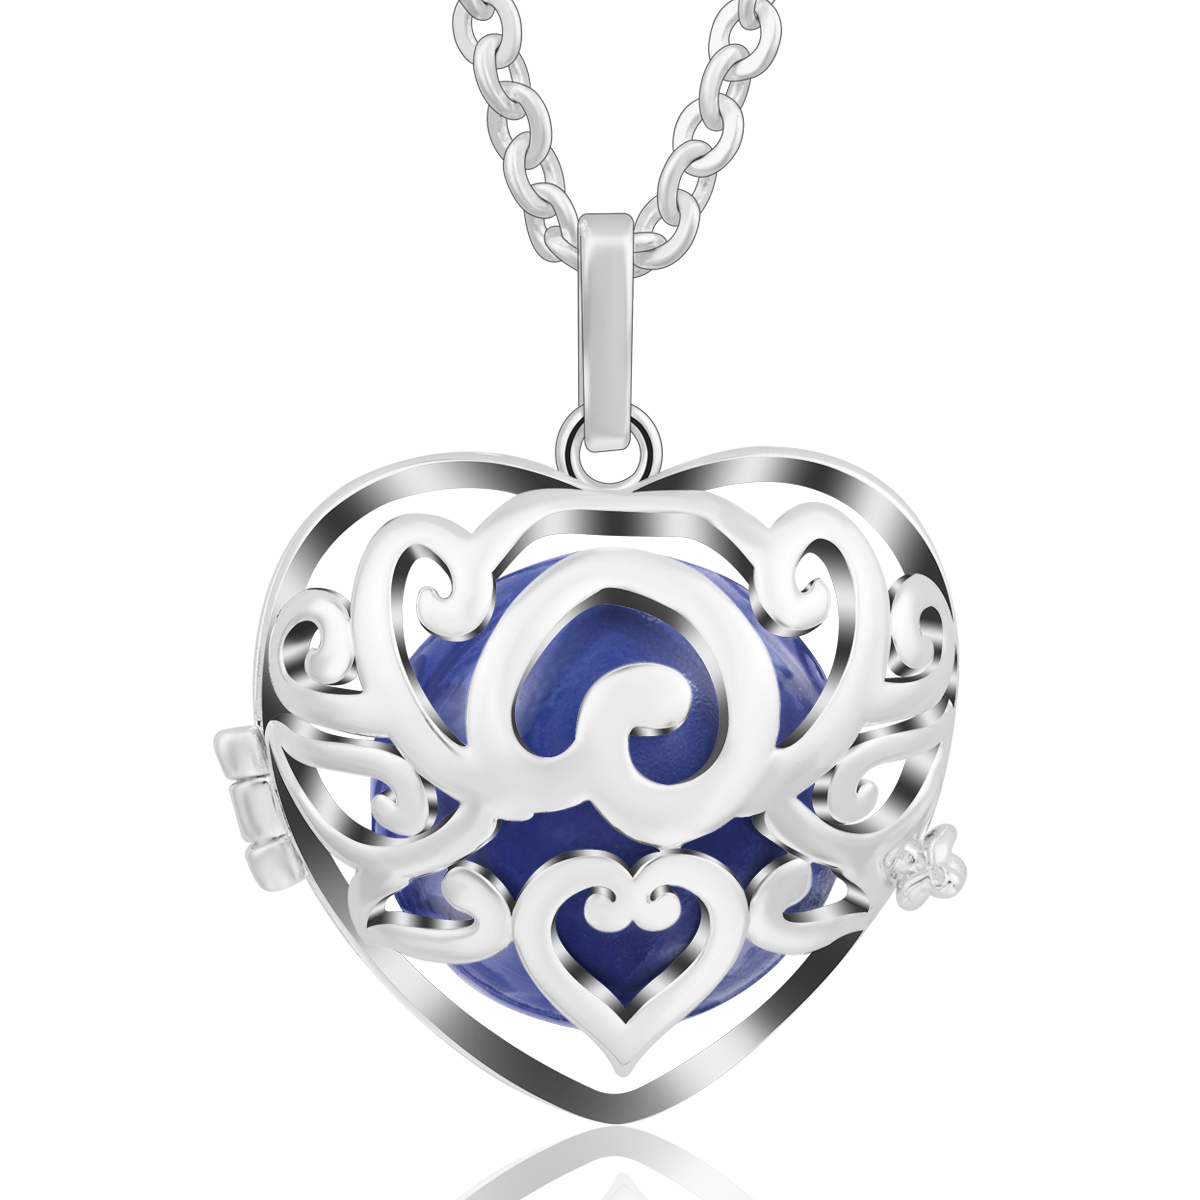 Hollow Heart Shape Locket Pendant Cage Box Essential Oil Aromatherapy Necklace Jewelry